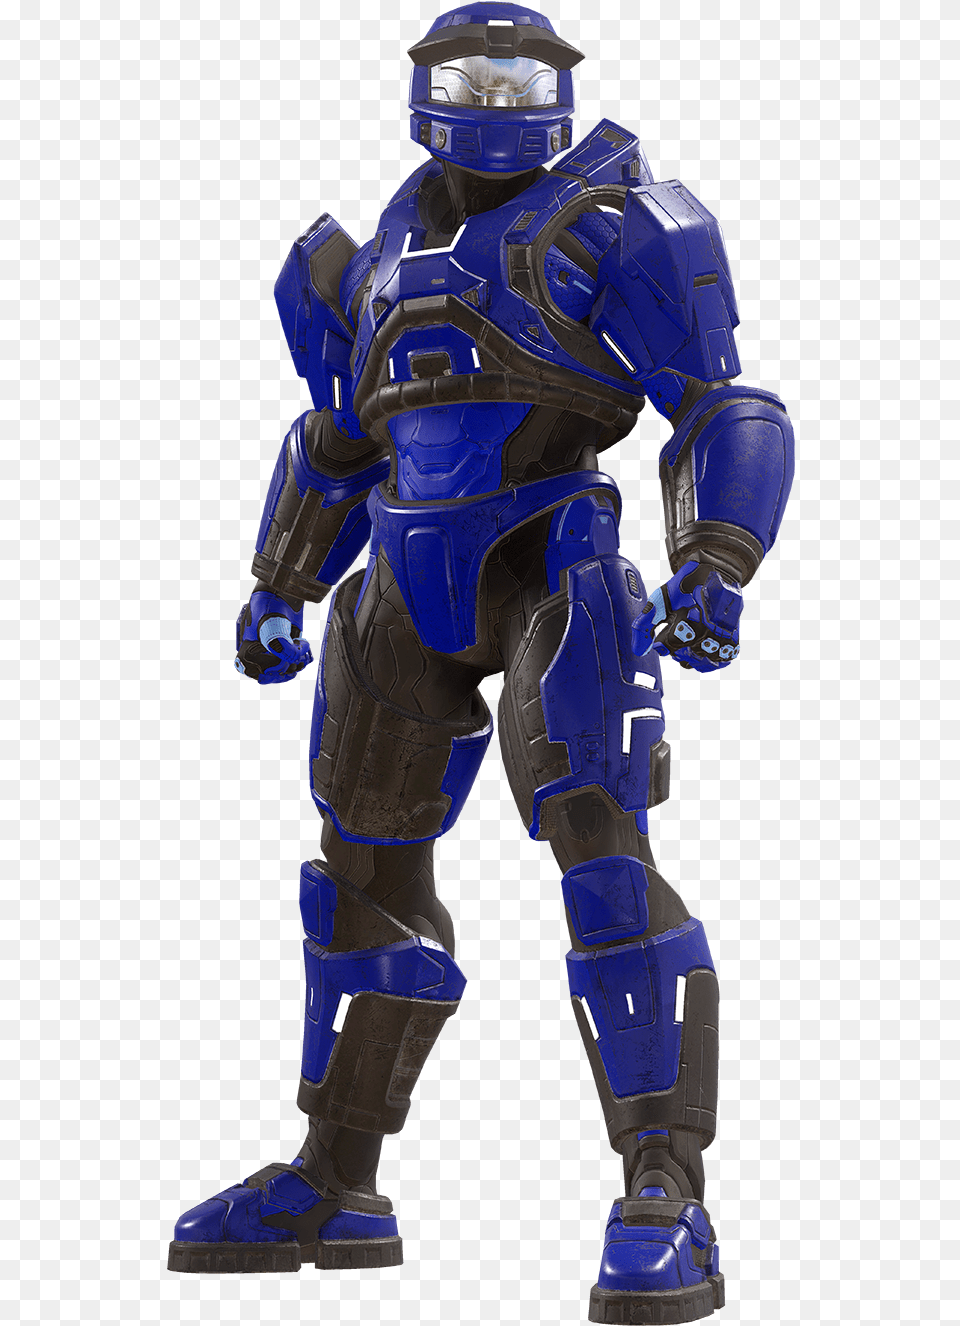 Darkseid Image With No Background Halo 5 Mark 5 Armor, Toy, Helmet, Robot Free Png Download